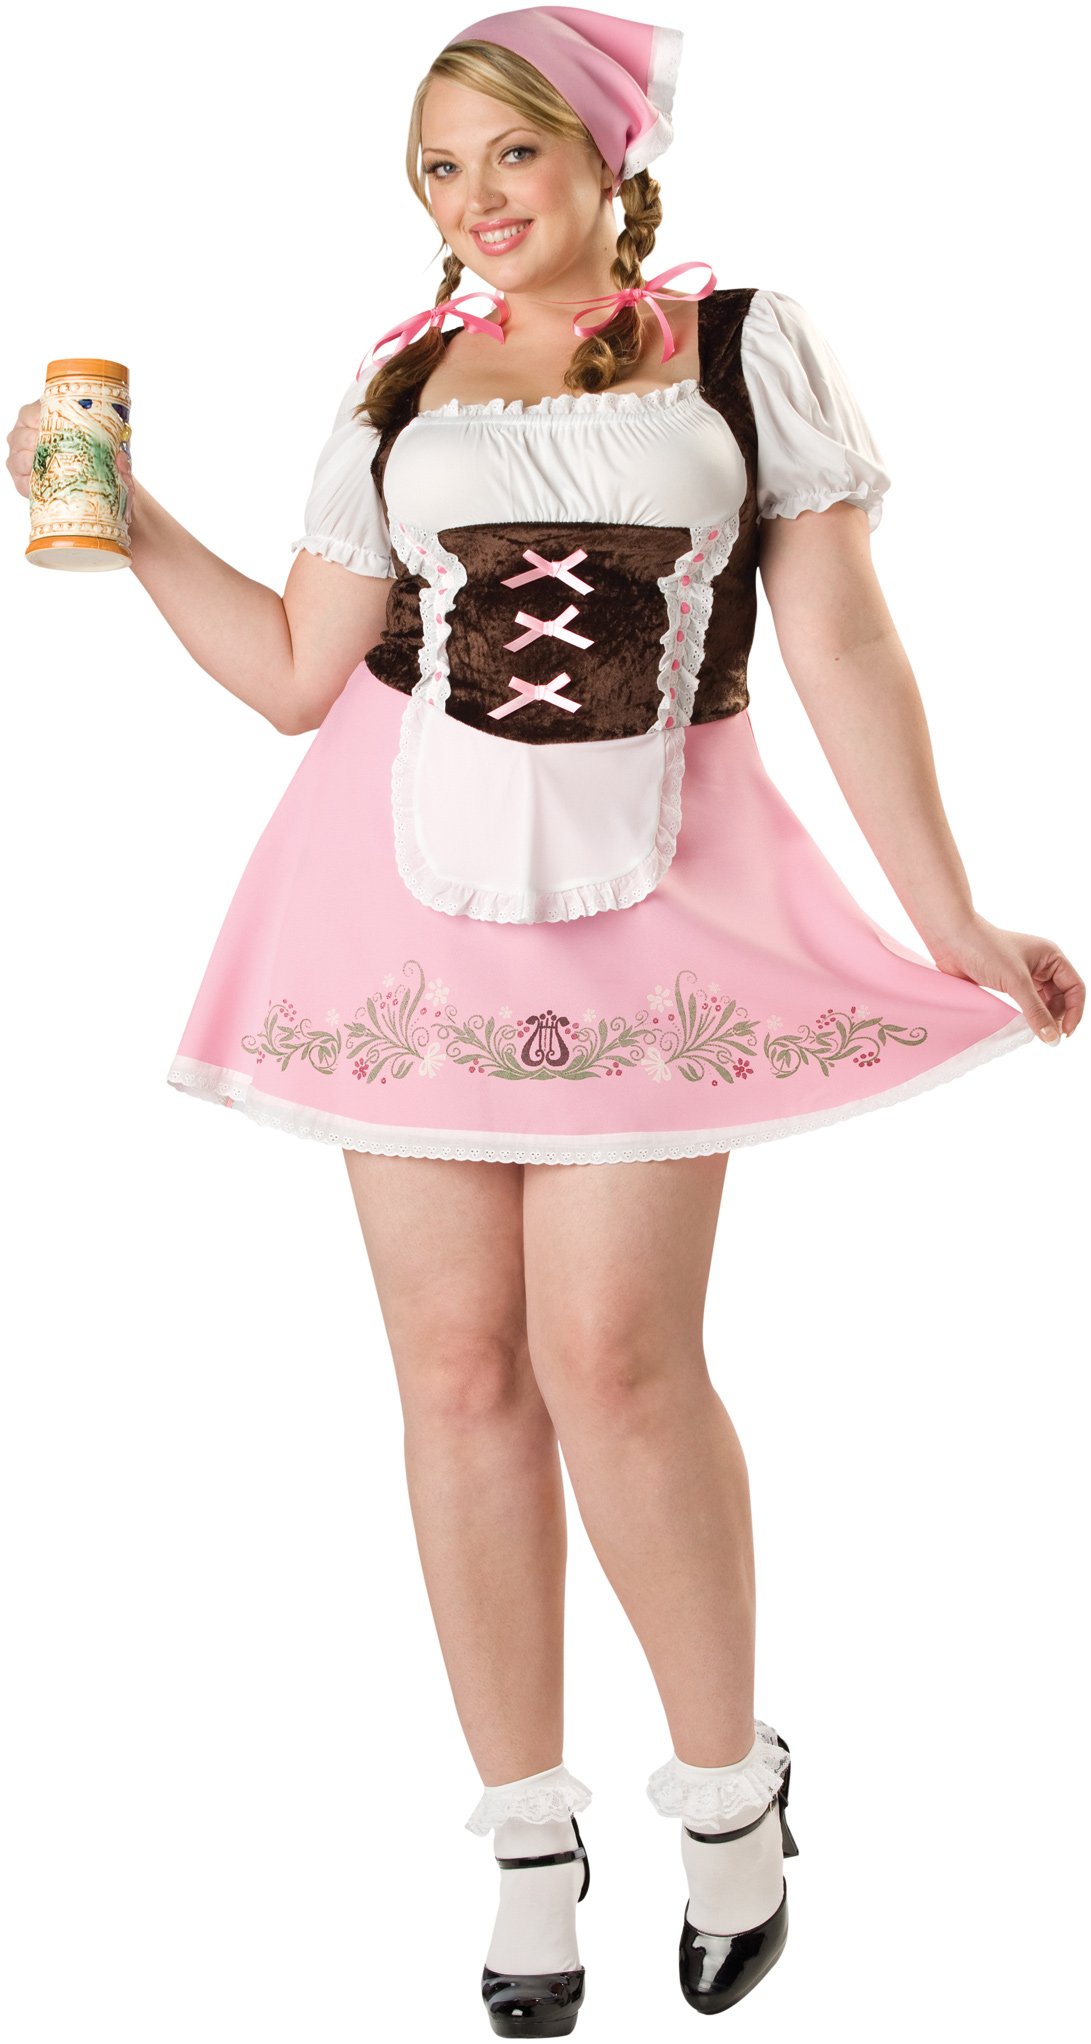 Fetching Fraulein Adult Plus Costume - Click Image to Close